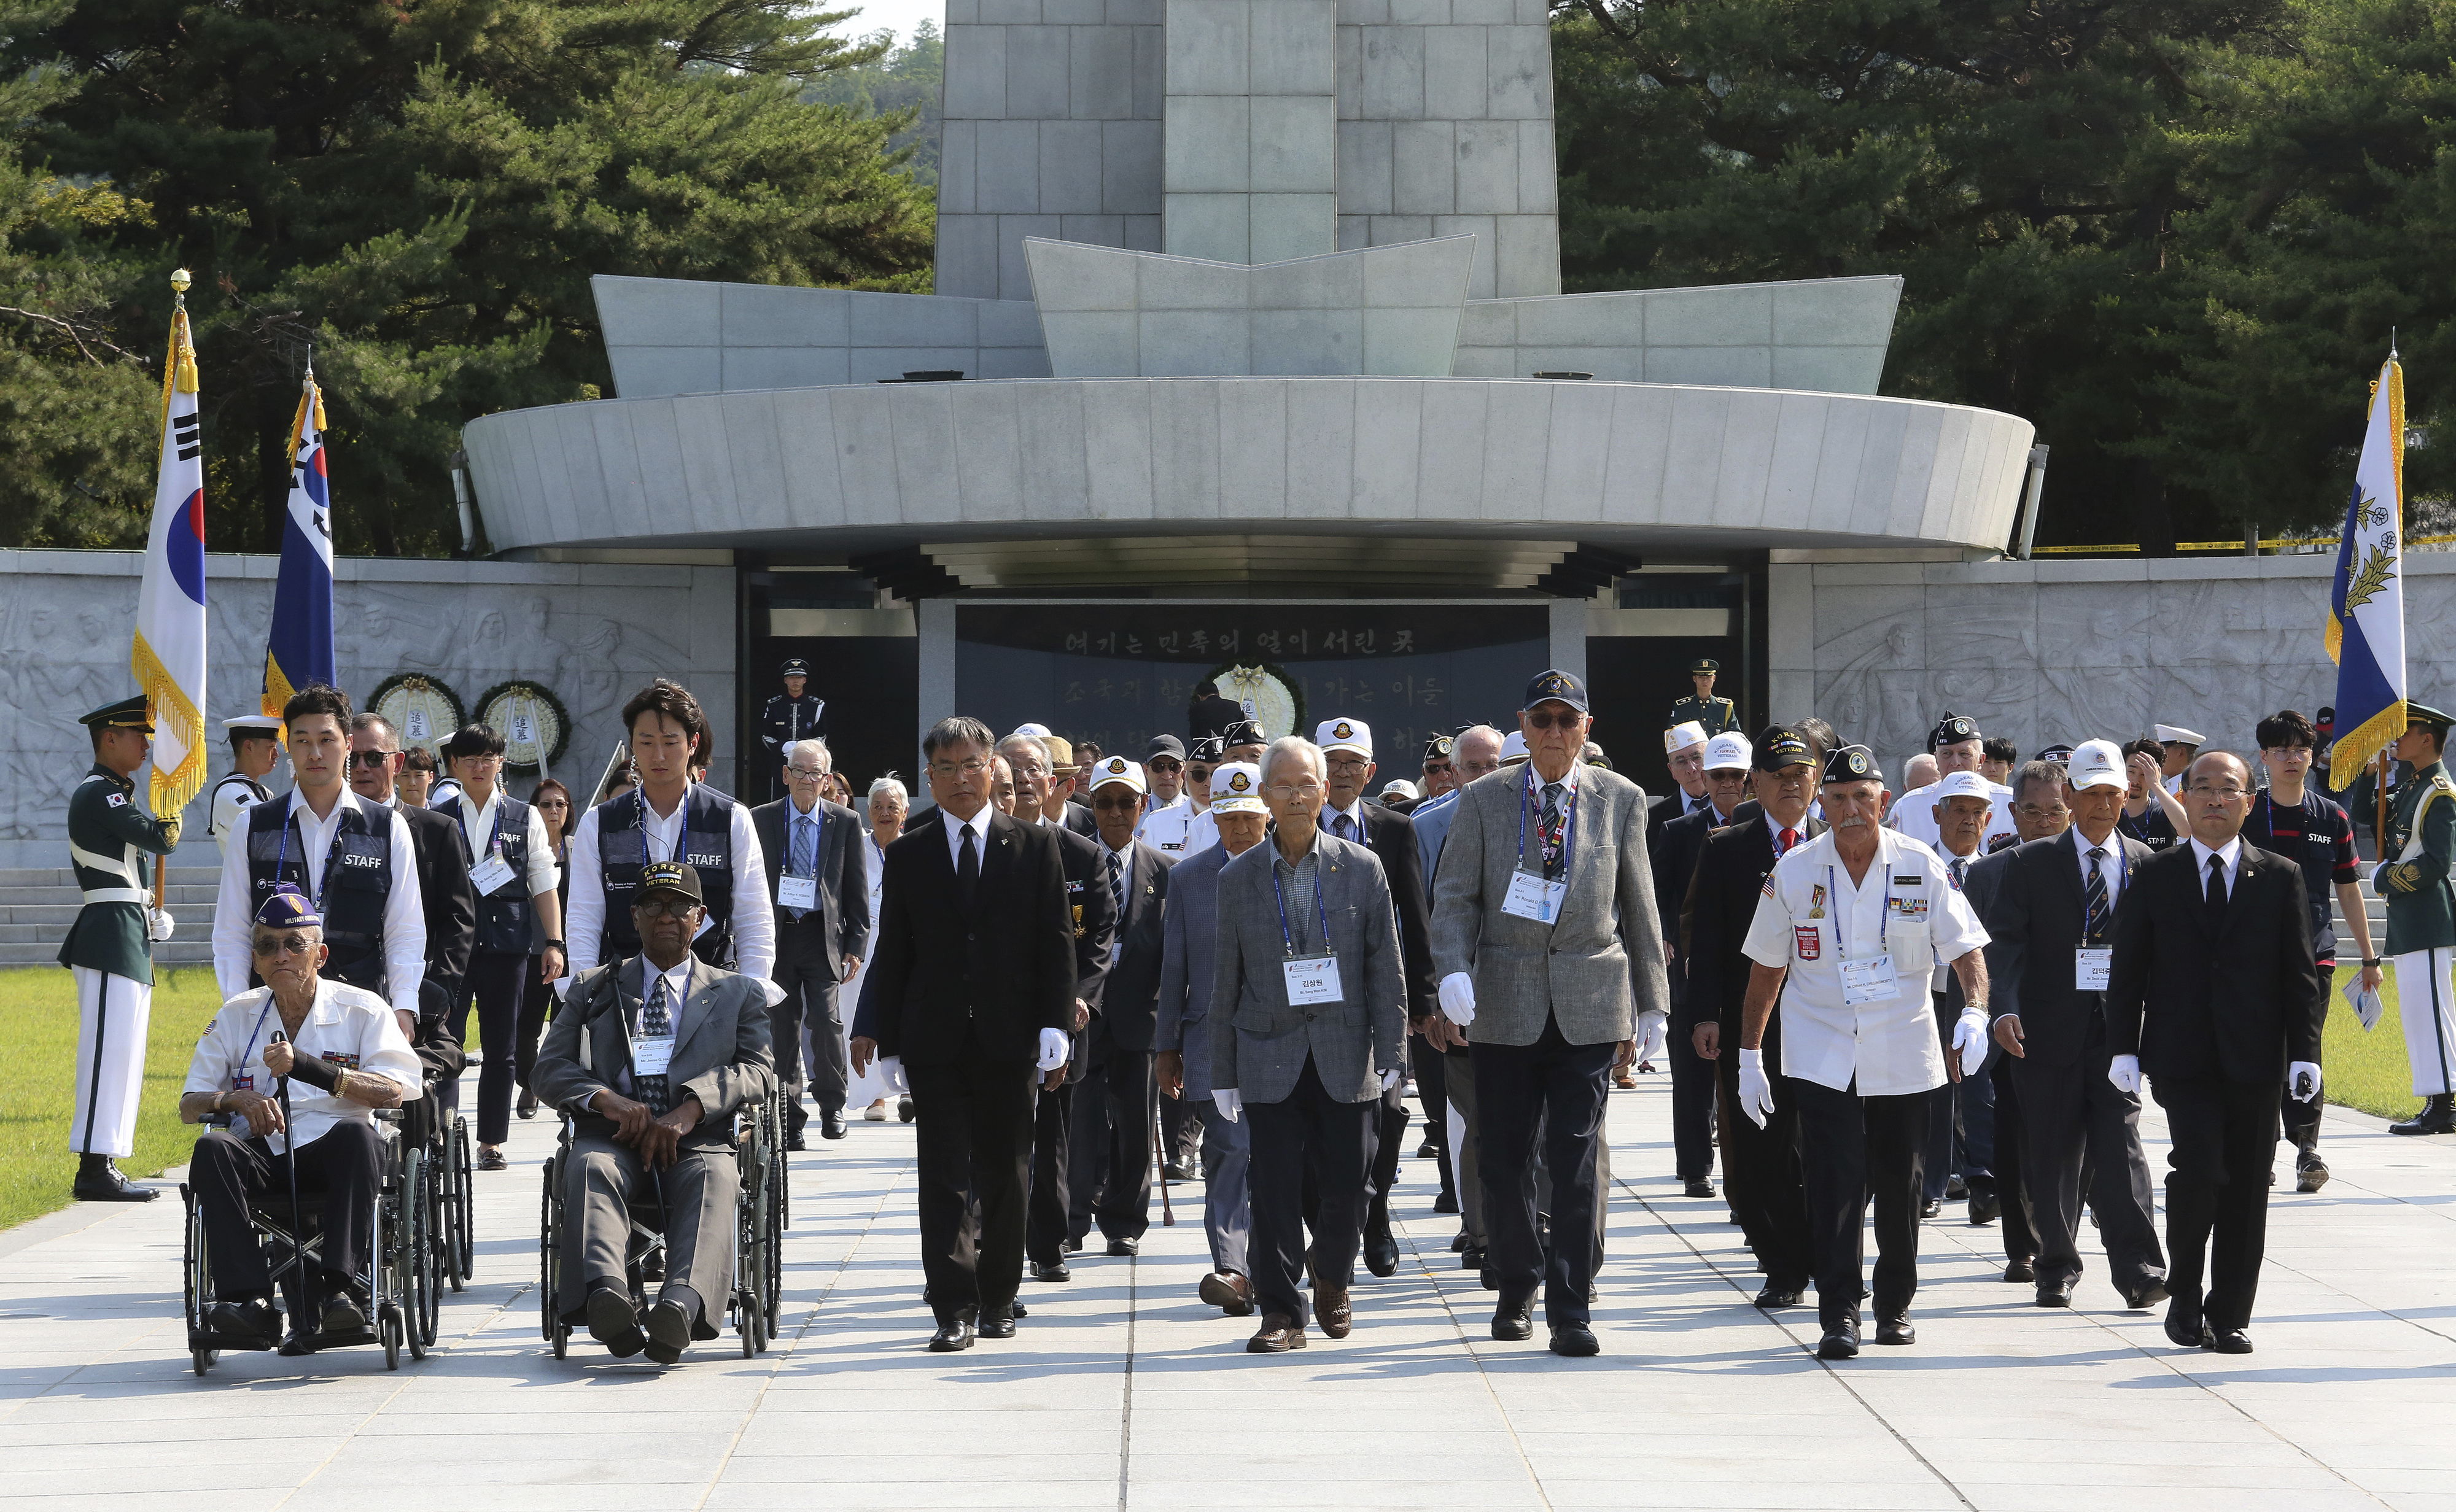 South Korean and U.S. veterans of the Korean War visit on the eve of the 69th anniversary of the outbreak of the Korean War at the National Cemetery in Seoul, South Korea, Monday, June 24, 2019. 62 U.S. war veterans and their families, along with 20 Korean veterans and their families residing overseas, arrived on Sunday, June 23, here for a six-day visit to mark the anniversary. (AP Photo/Ahn Young-joon)